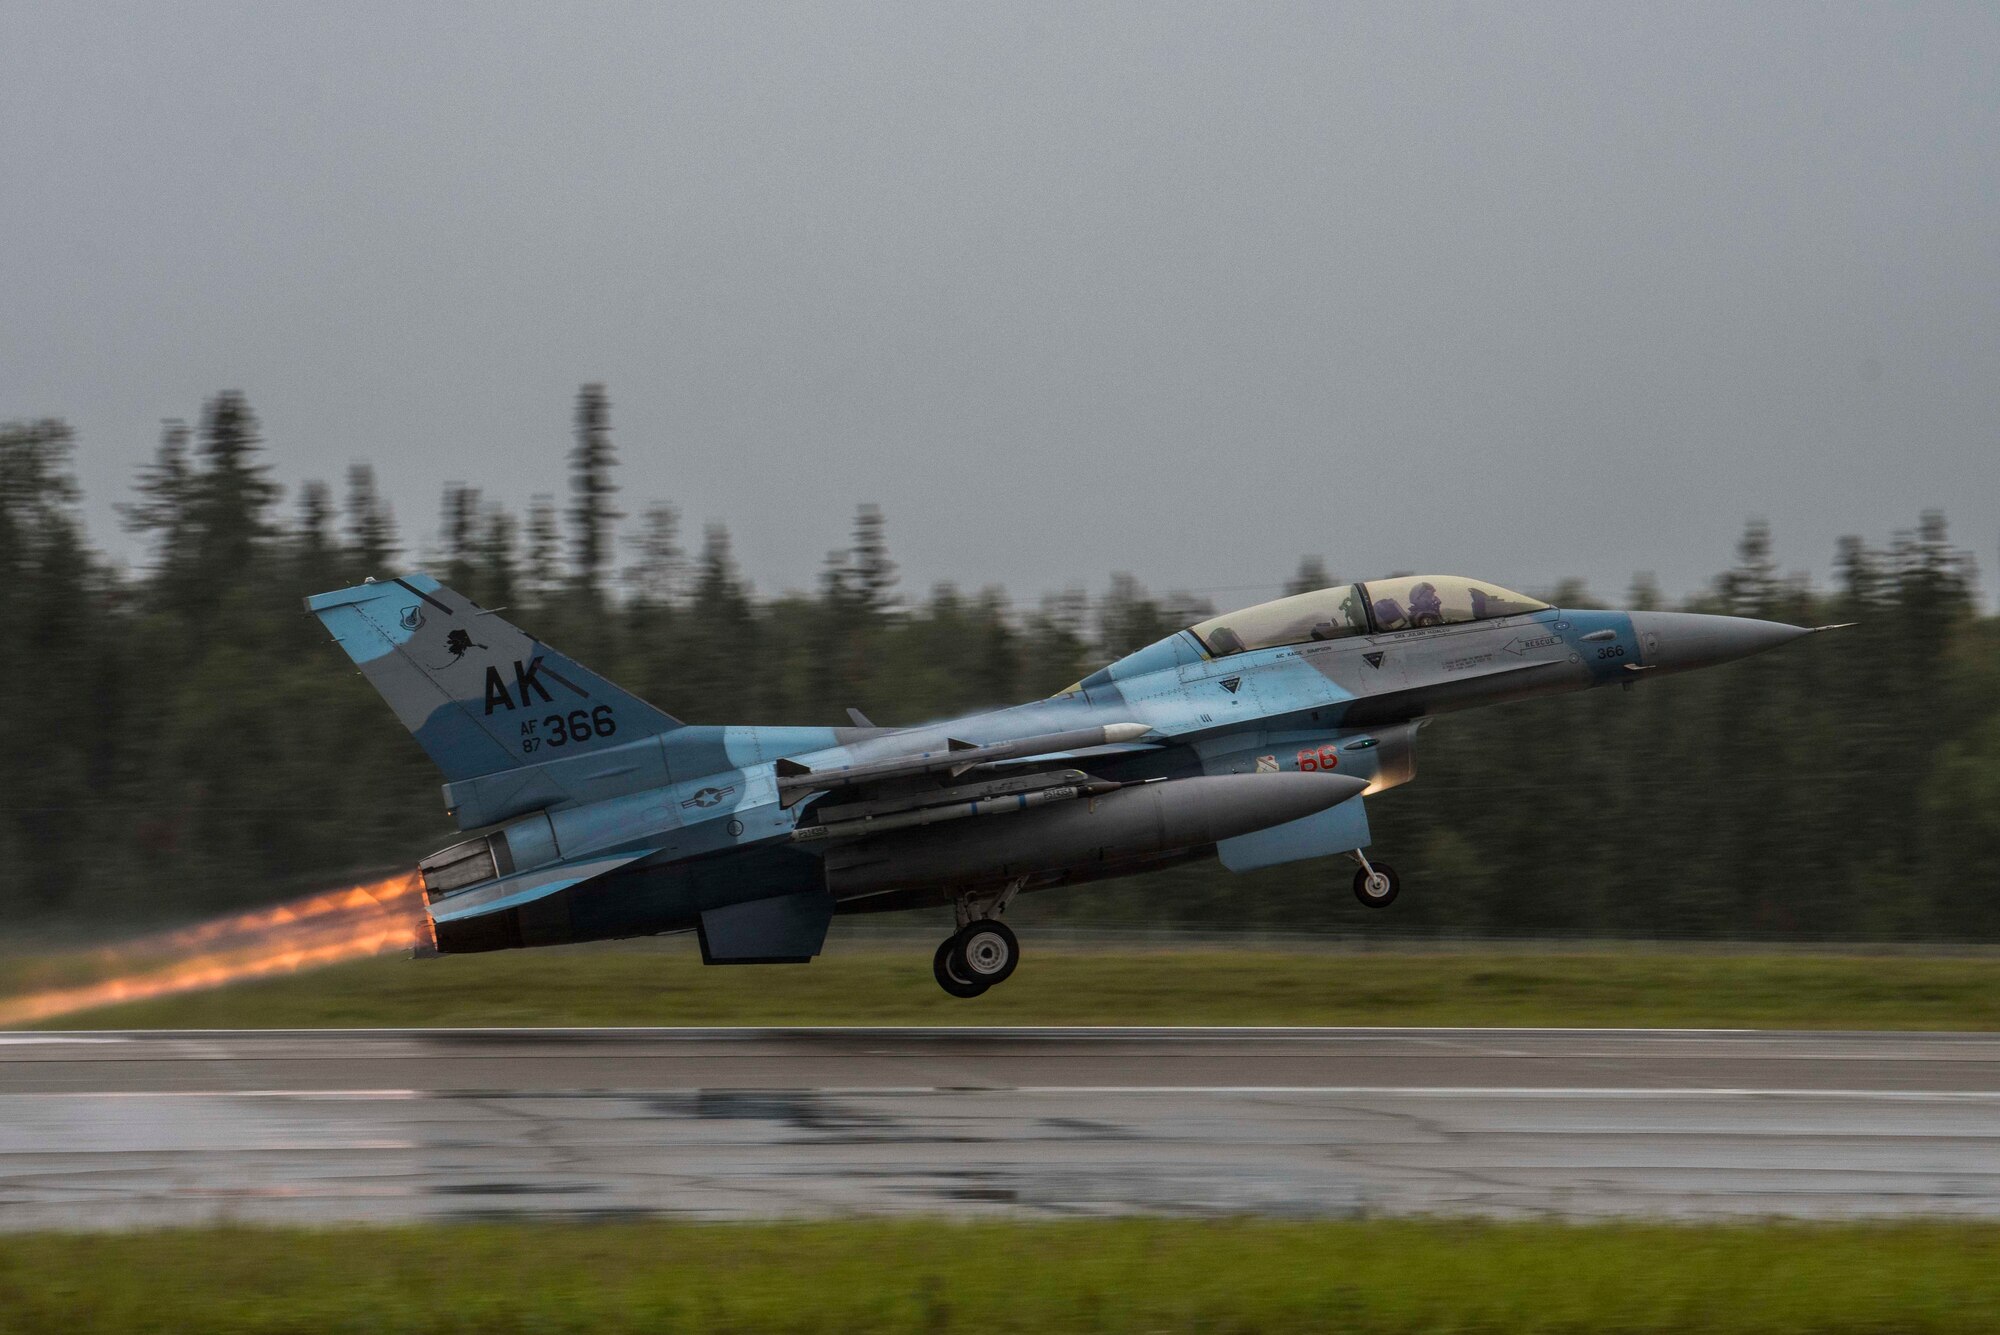 A U.S. Air Force F-16 Fighting Falcon, assigned to the 18th Aggressor Squadron, takes off during RED FLAG-Alaska (RF-A) 20-3 at Eielson Air Force Base, Alaska, Aug. 3, 2020. RF-A gives aviators an opportunity to hone skills required in combat by providing training scenarios designed to replicate near-peer adversary tactics, techniques and procedures in a controlled environment. (U.S. Air Force photo by Airman 1st Class Aaron Larue Guerrisky)